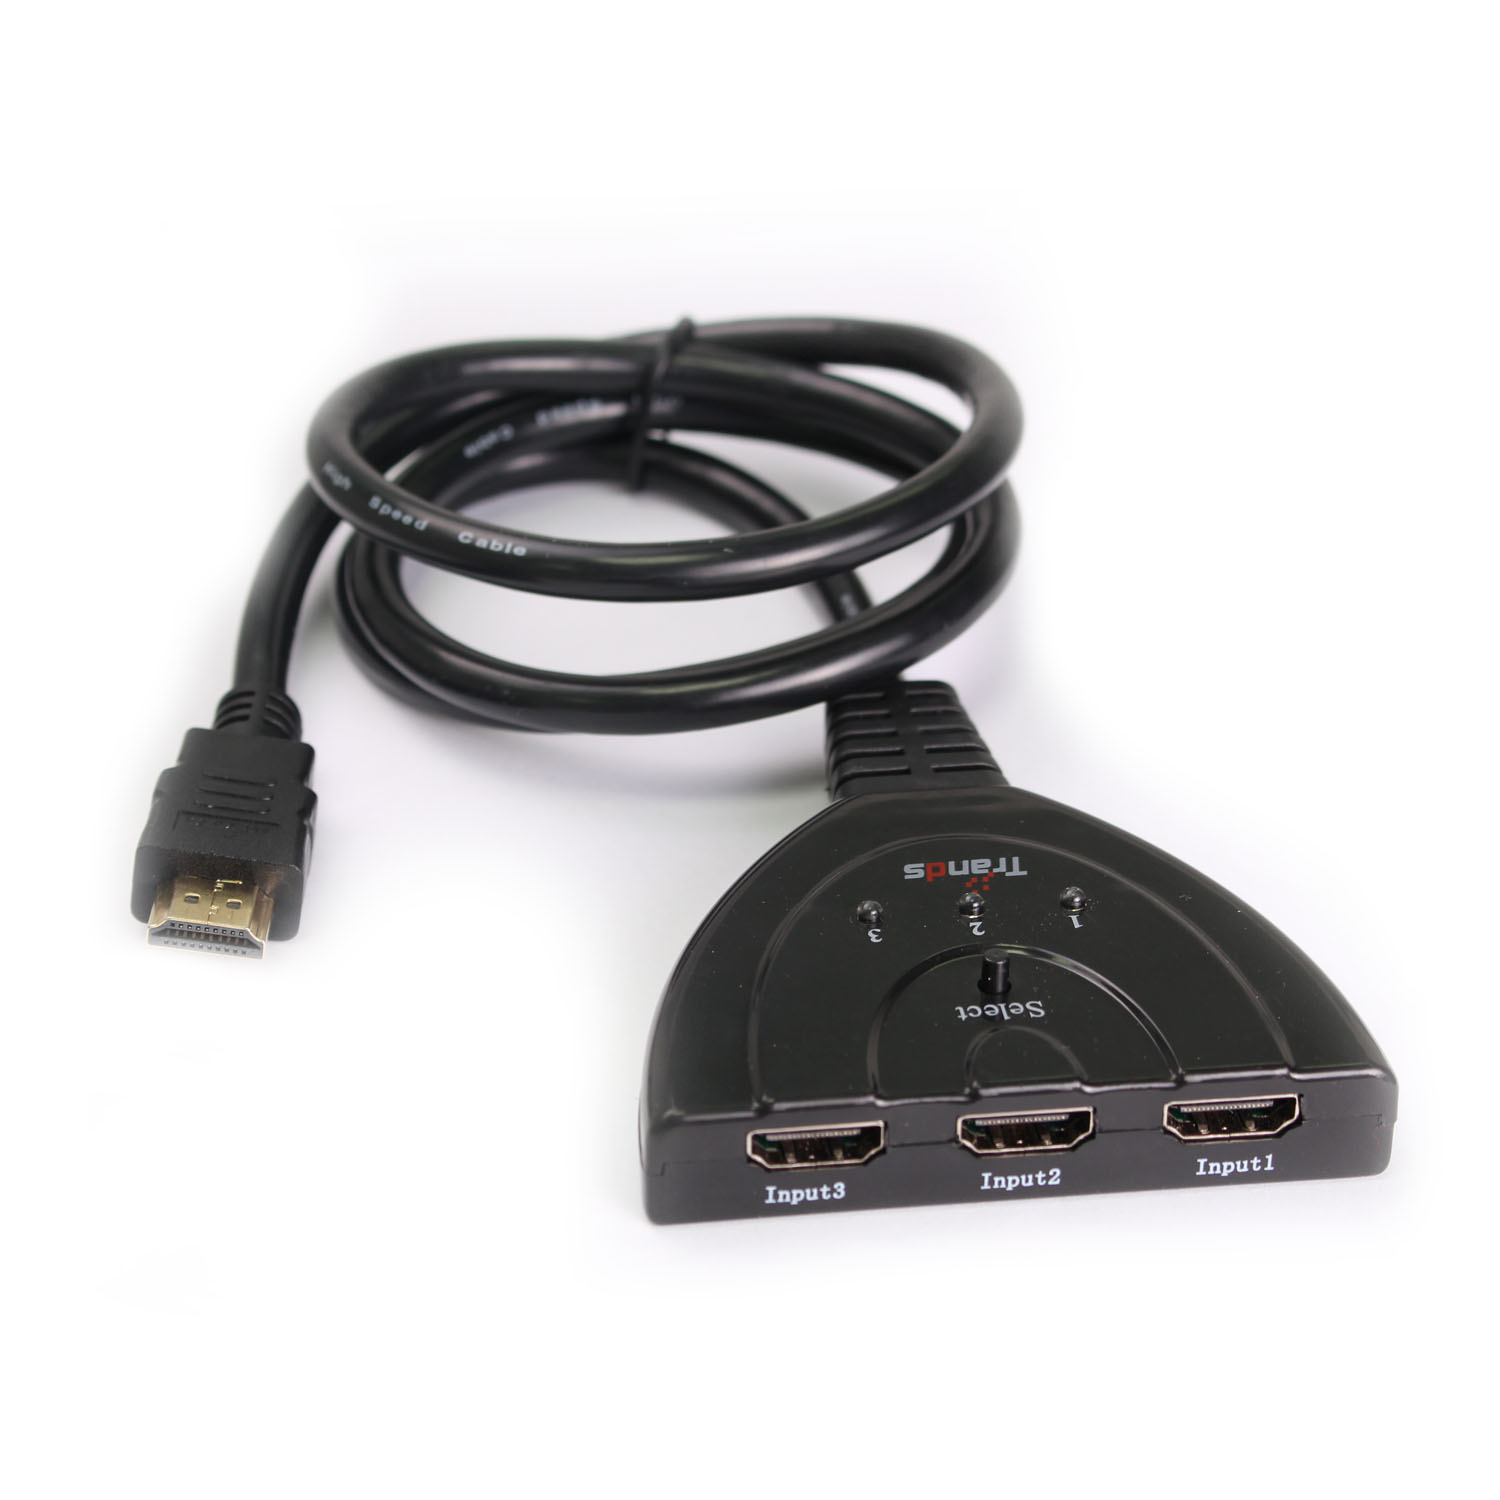 HDMI Switch Cable, TR-HD131